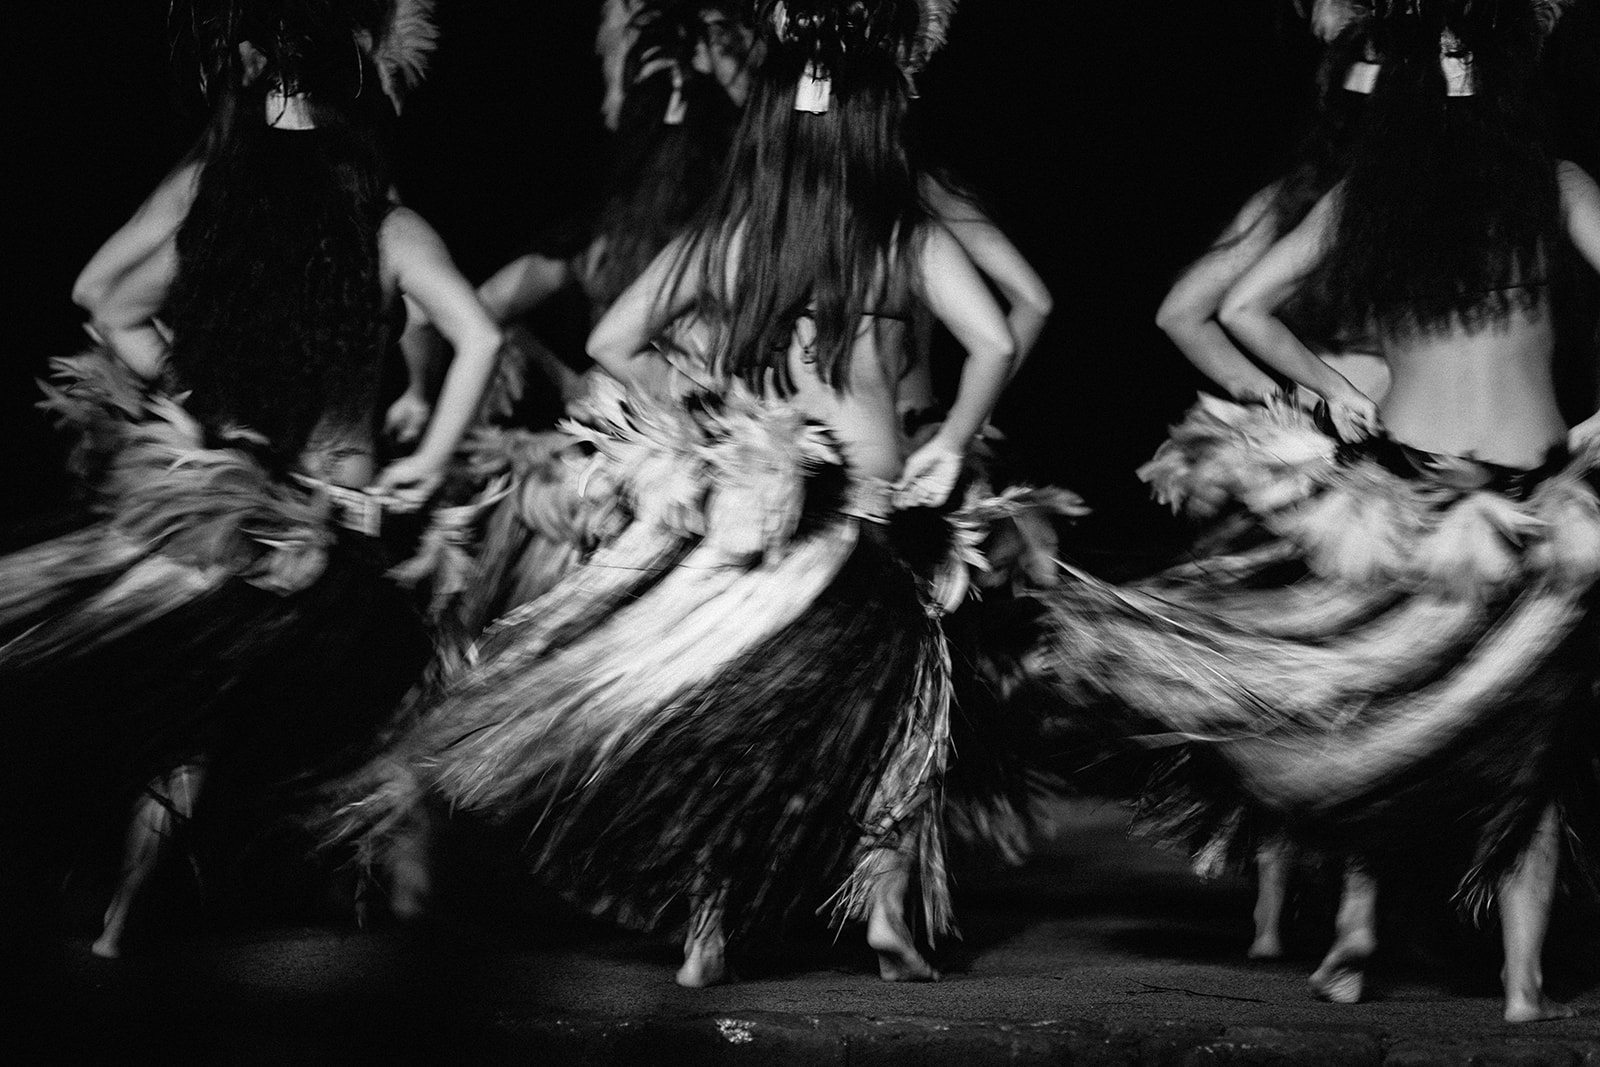 Hula dancers putting on a show in Lahaina